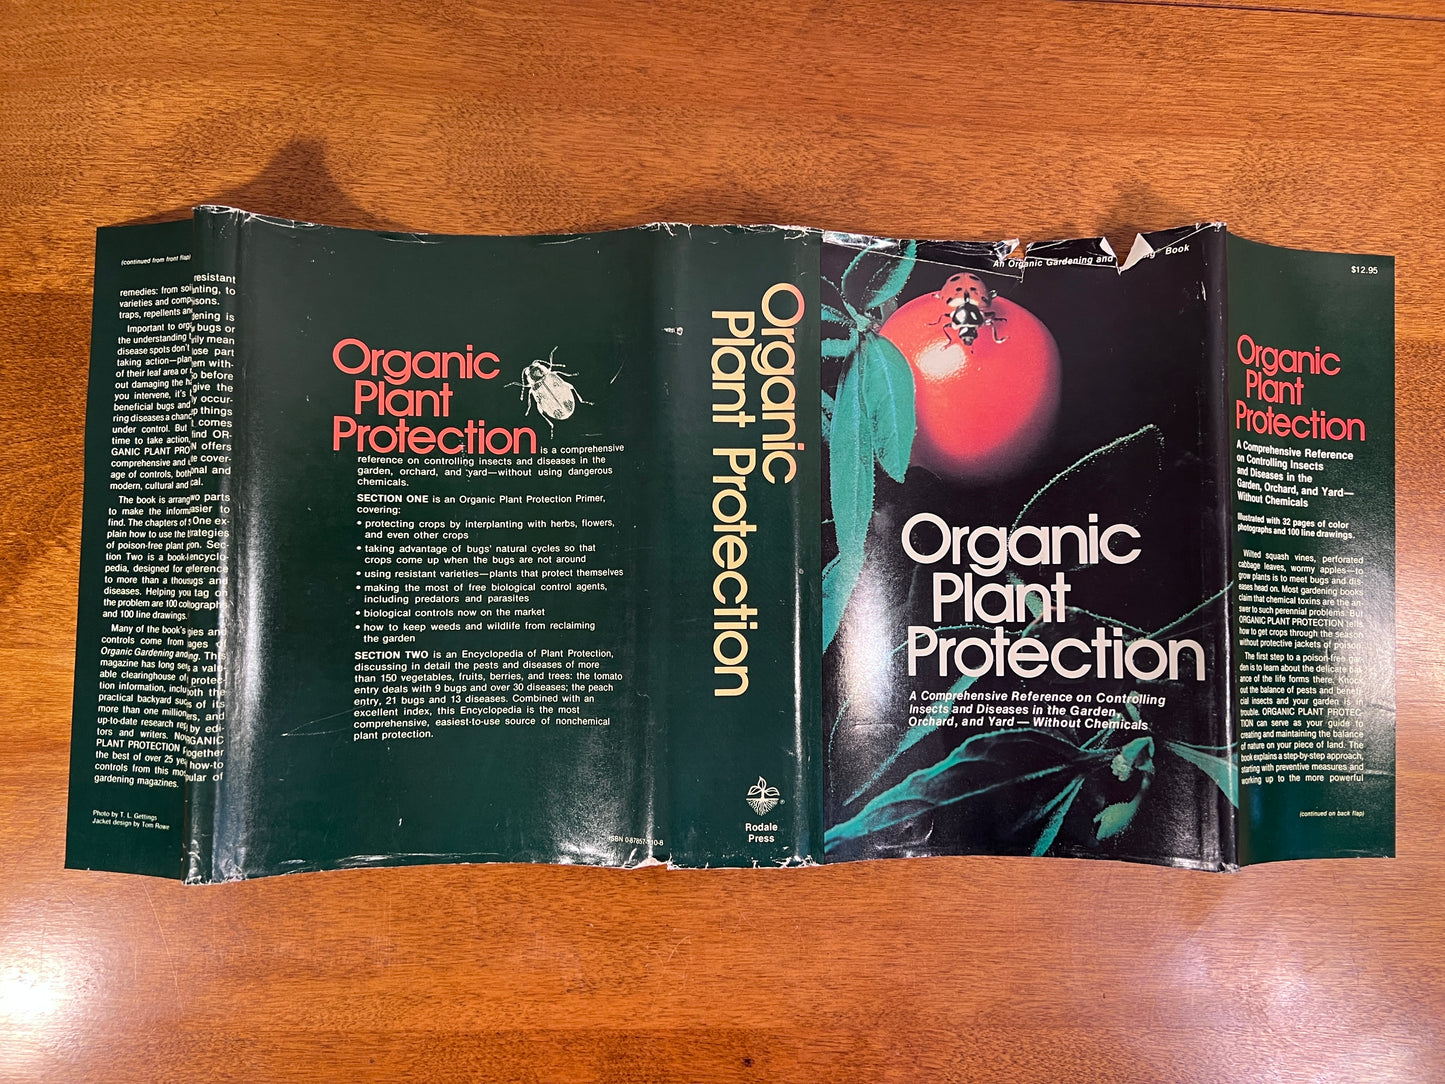 Organic Plant Protection: Reference on Controlling Insects & Diseases in the Garden